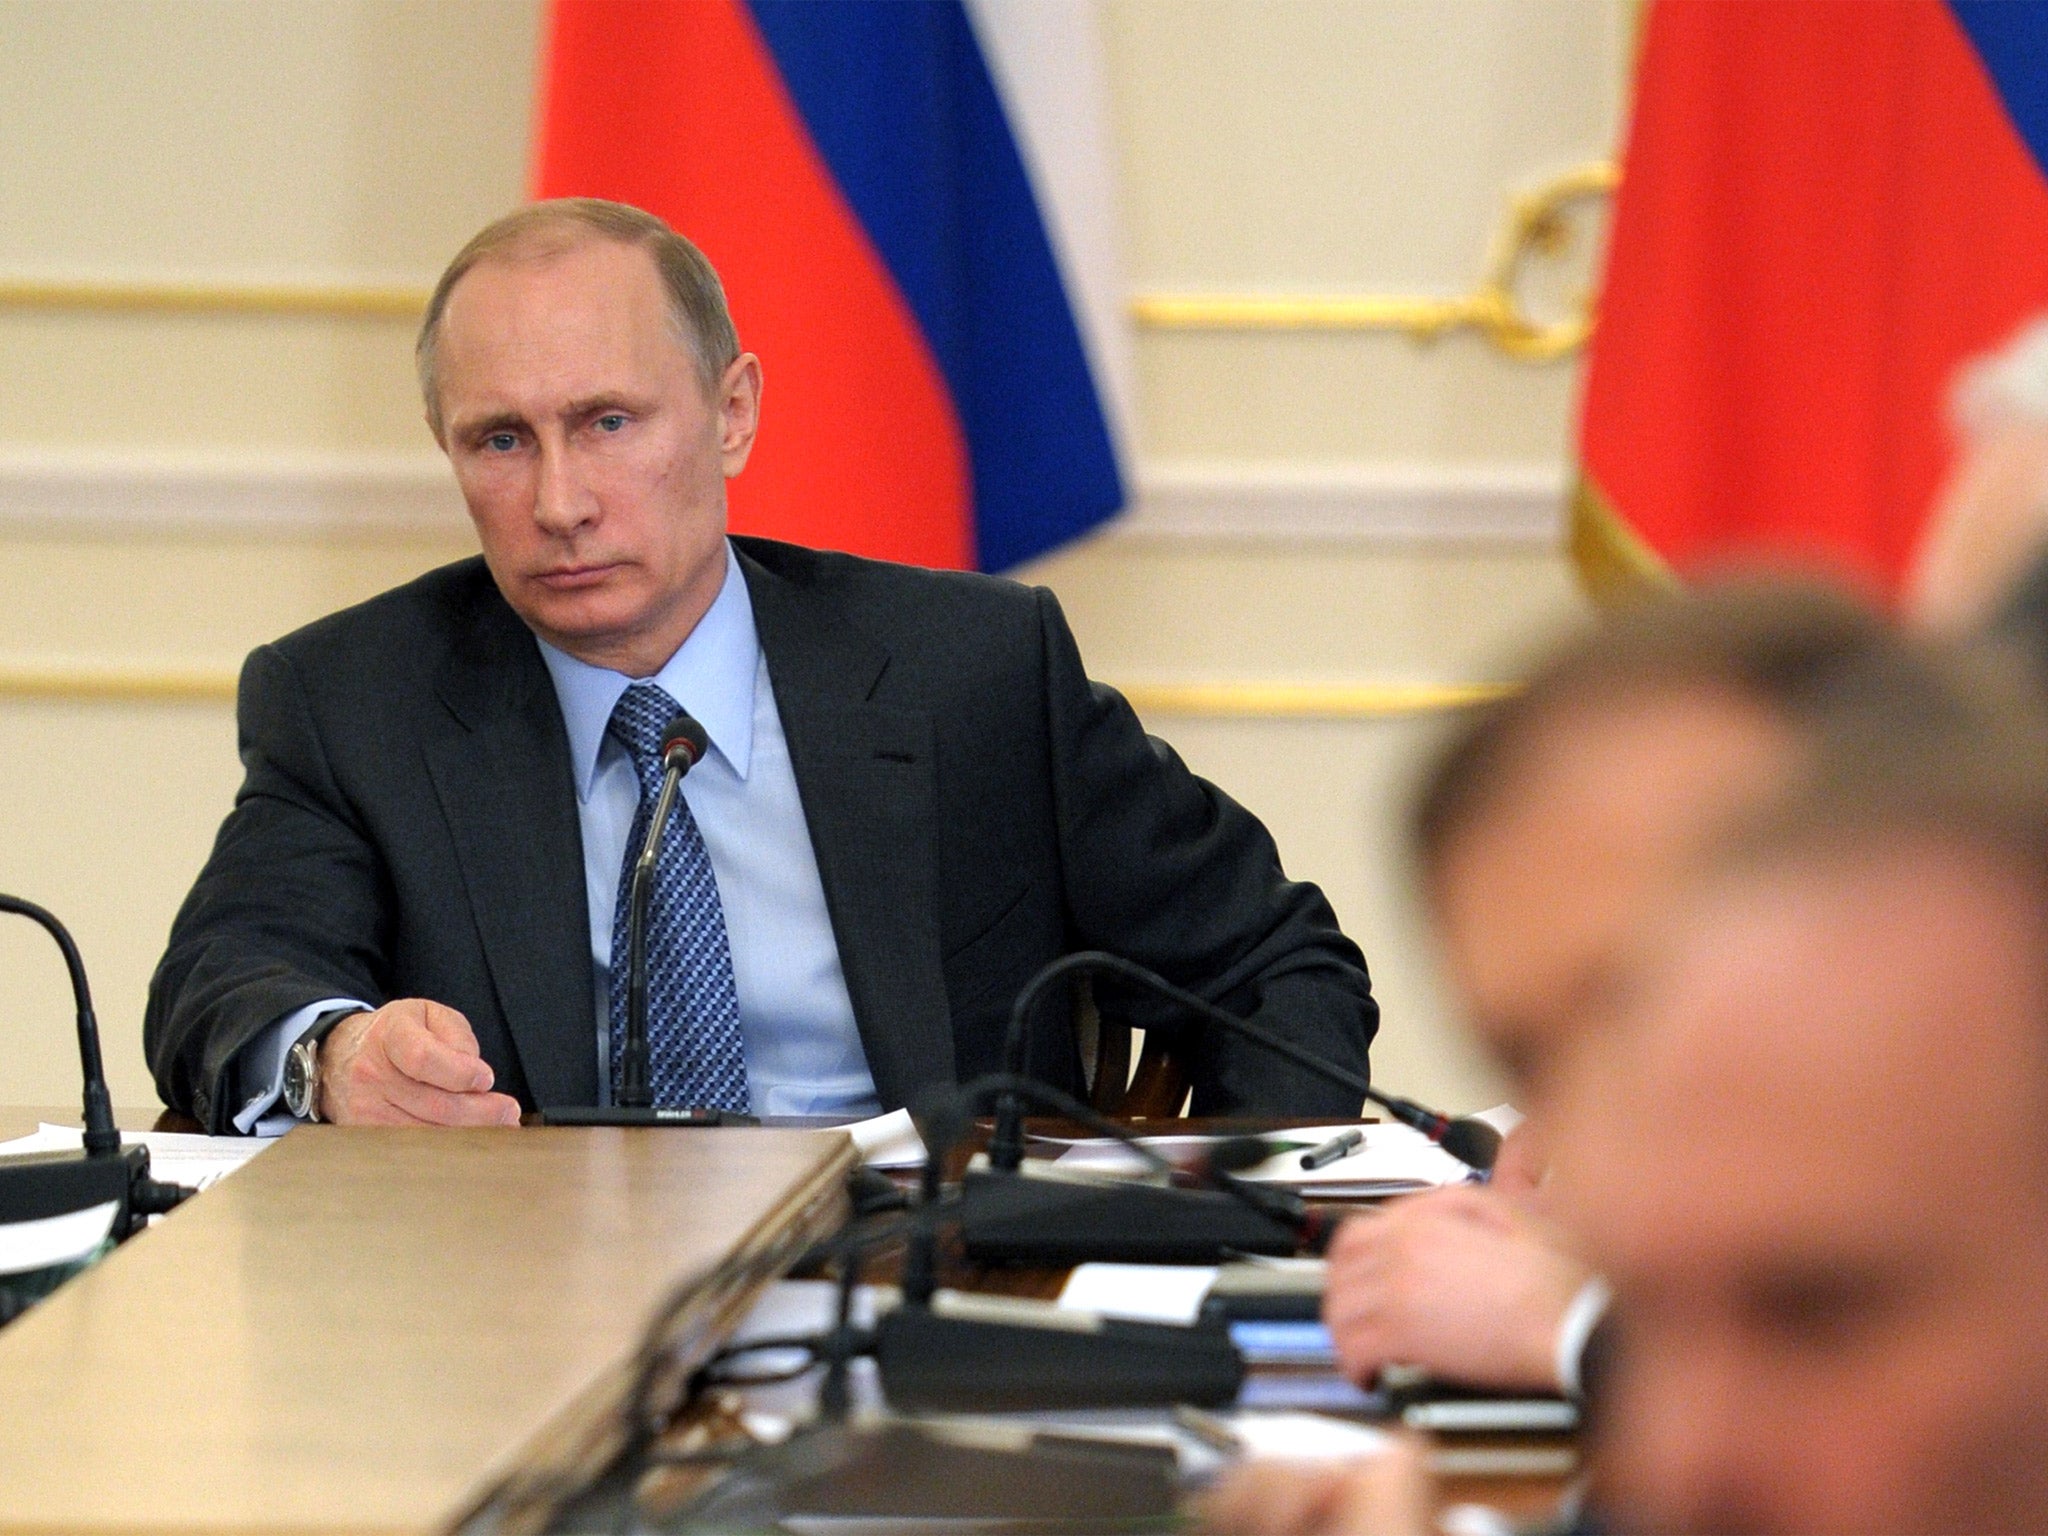 President Vladimir Putin chairs a government meeting in the Novo-Ogaryovo residence outside Moscow